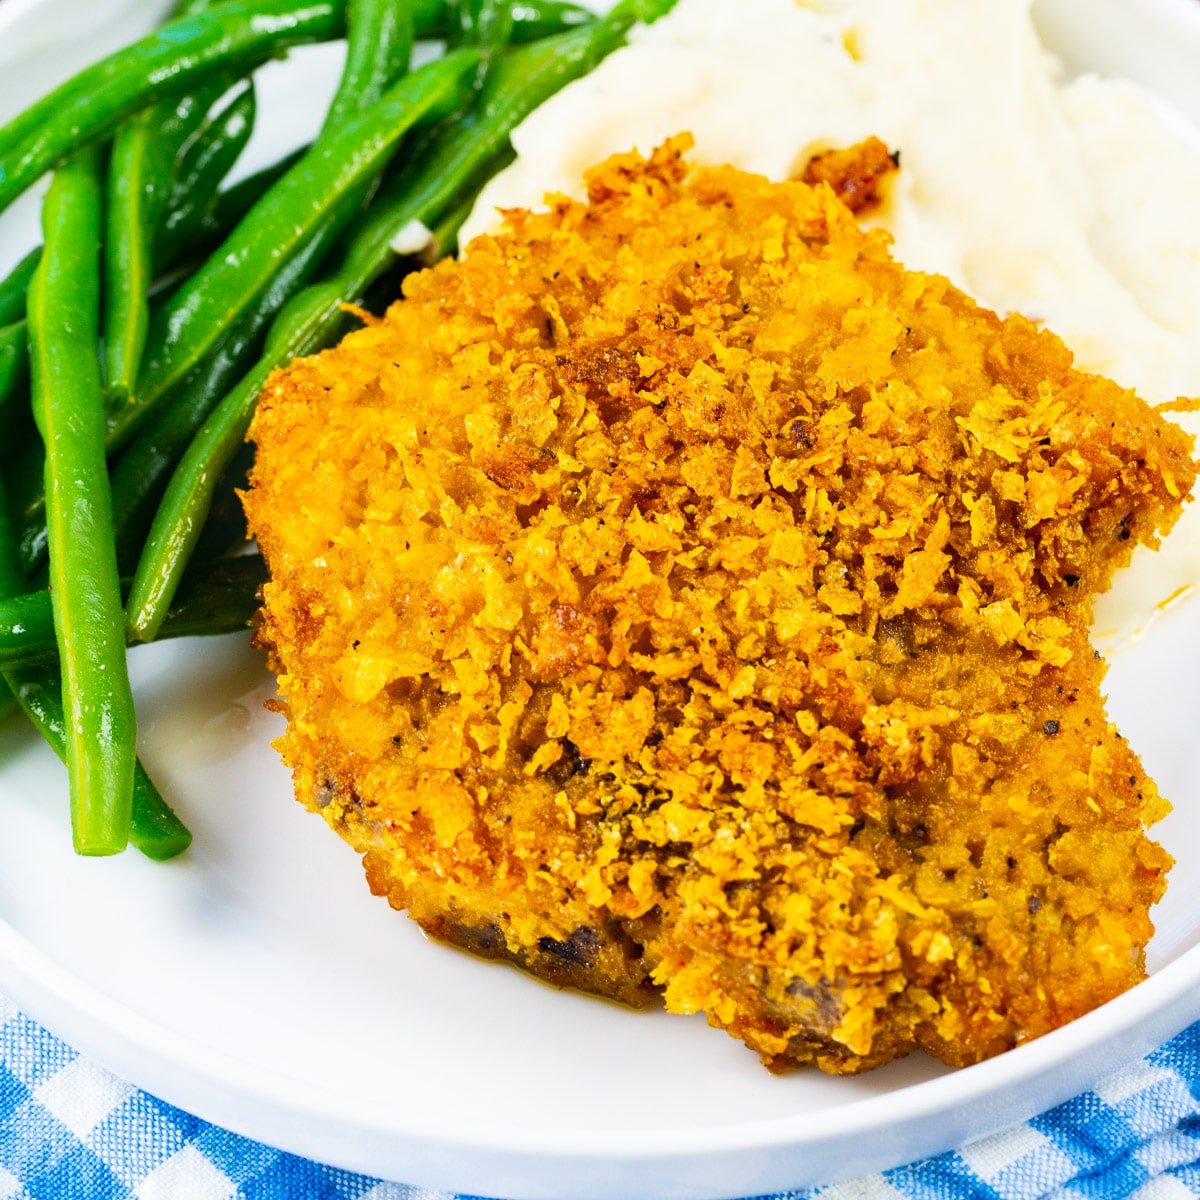 Cornflake Crusted Baked Pork Chops on plate with mashed potatoes and green beans.